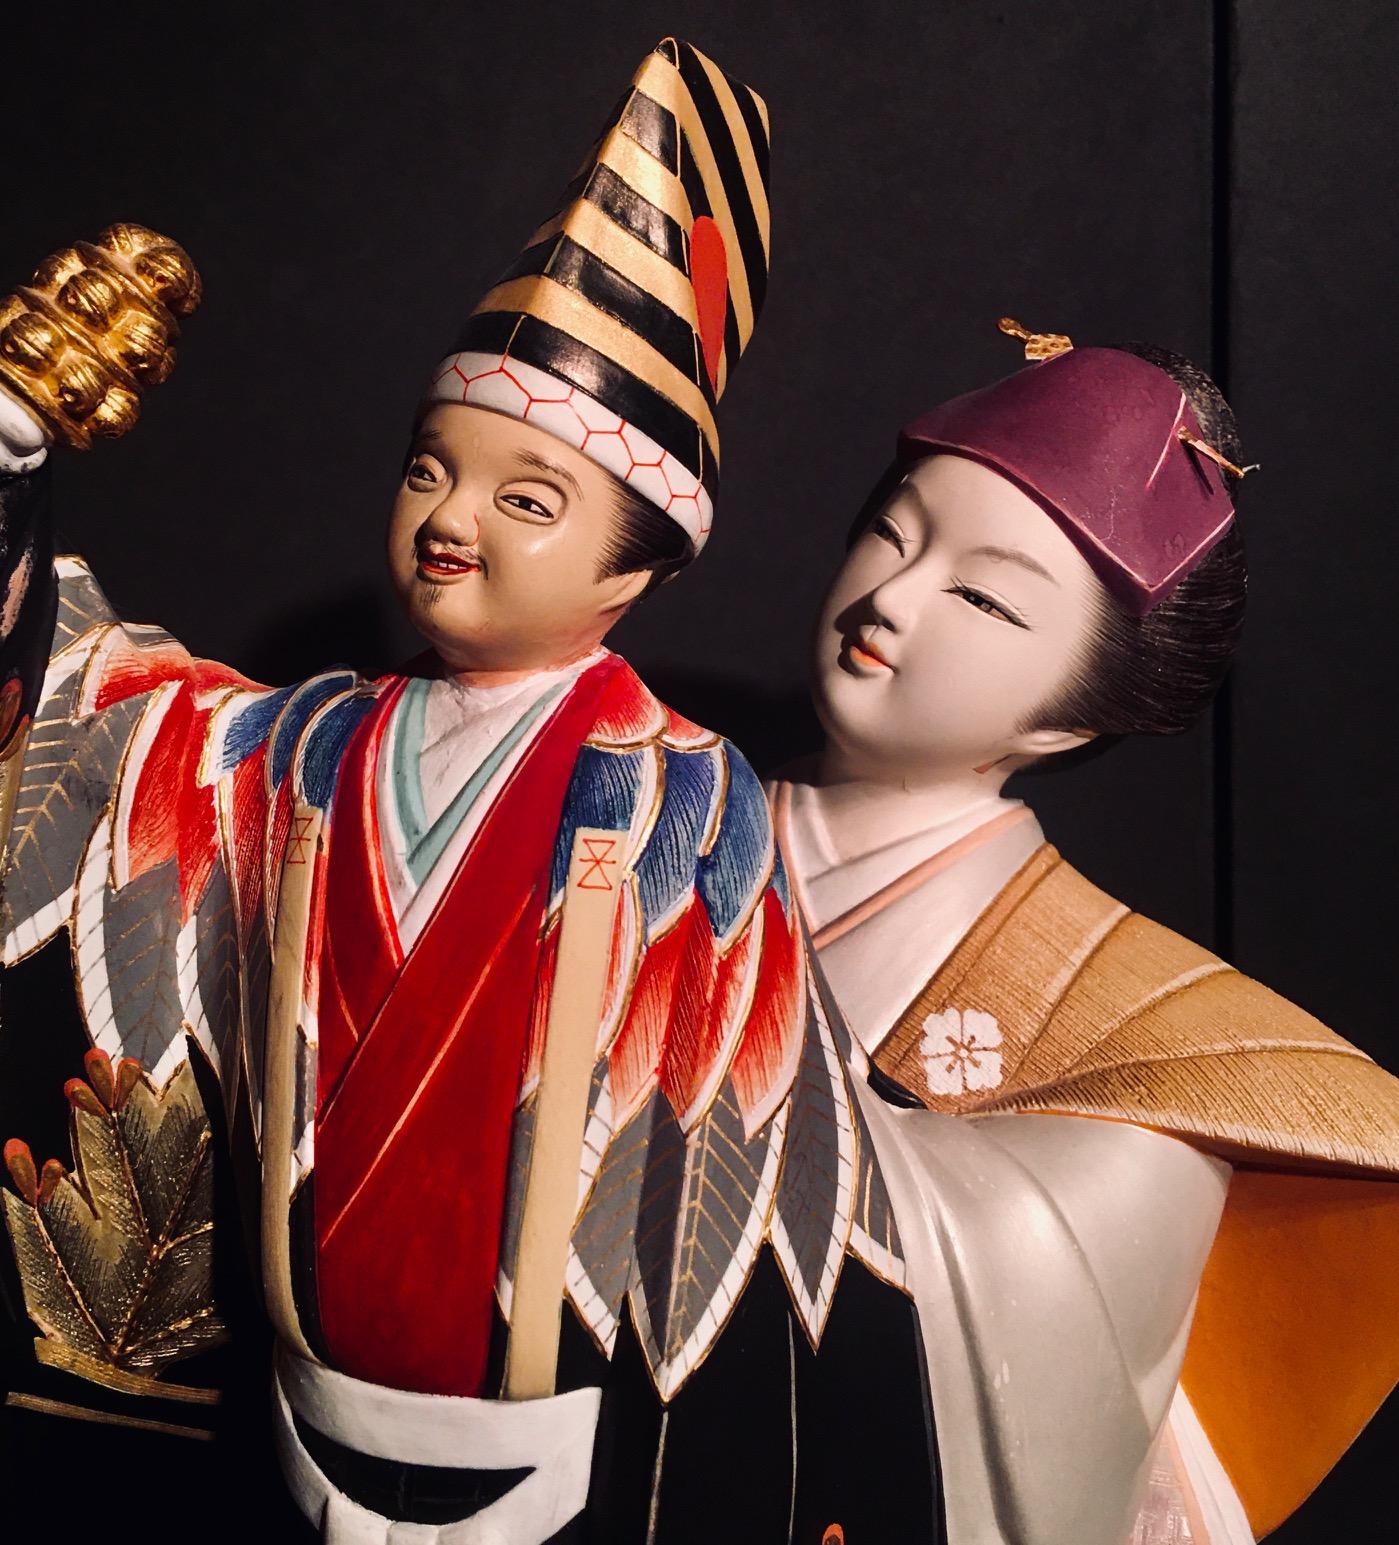 Japanese Showa period Hakata doll of a male puppeteer, entertaining the imperial household with his Sambaso puppet. Crafted in the finest Hakata studio, the figure is a masterpiece made for exhibition.

The Hakata doll’s porcelain skin is synonymous